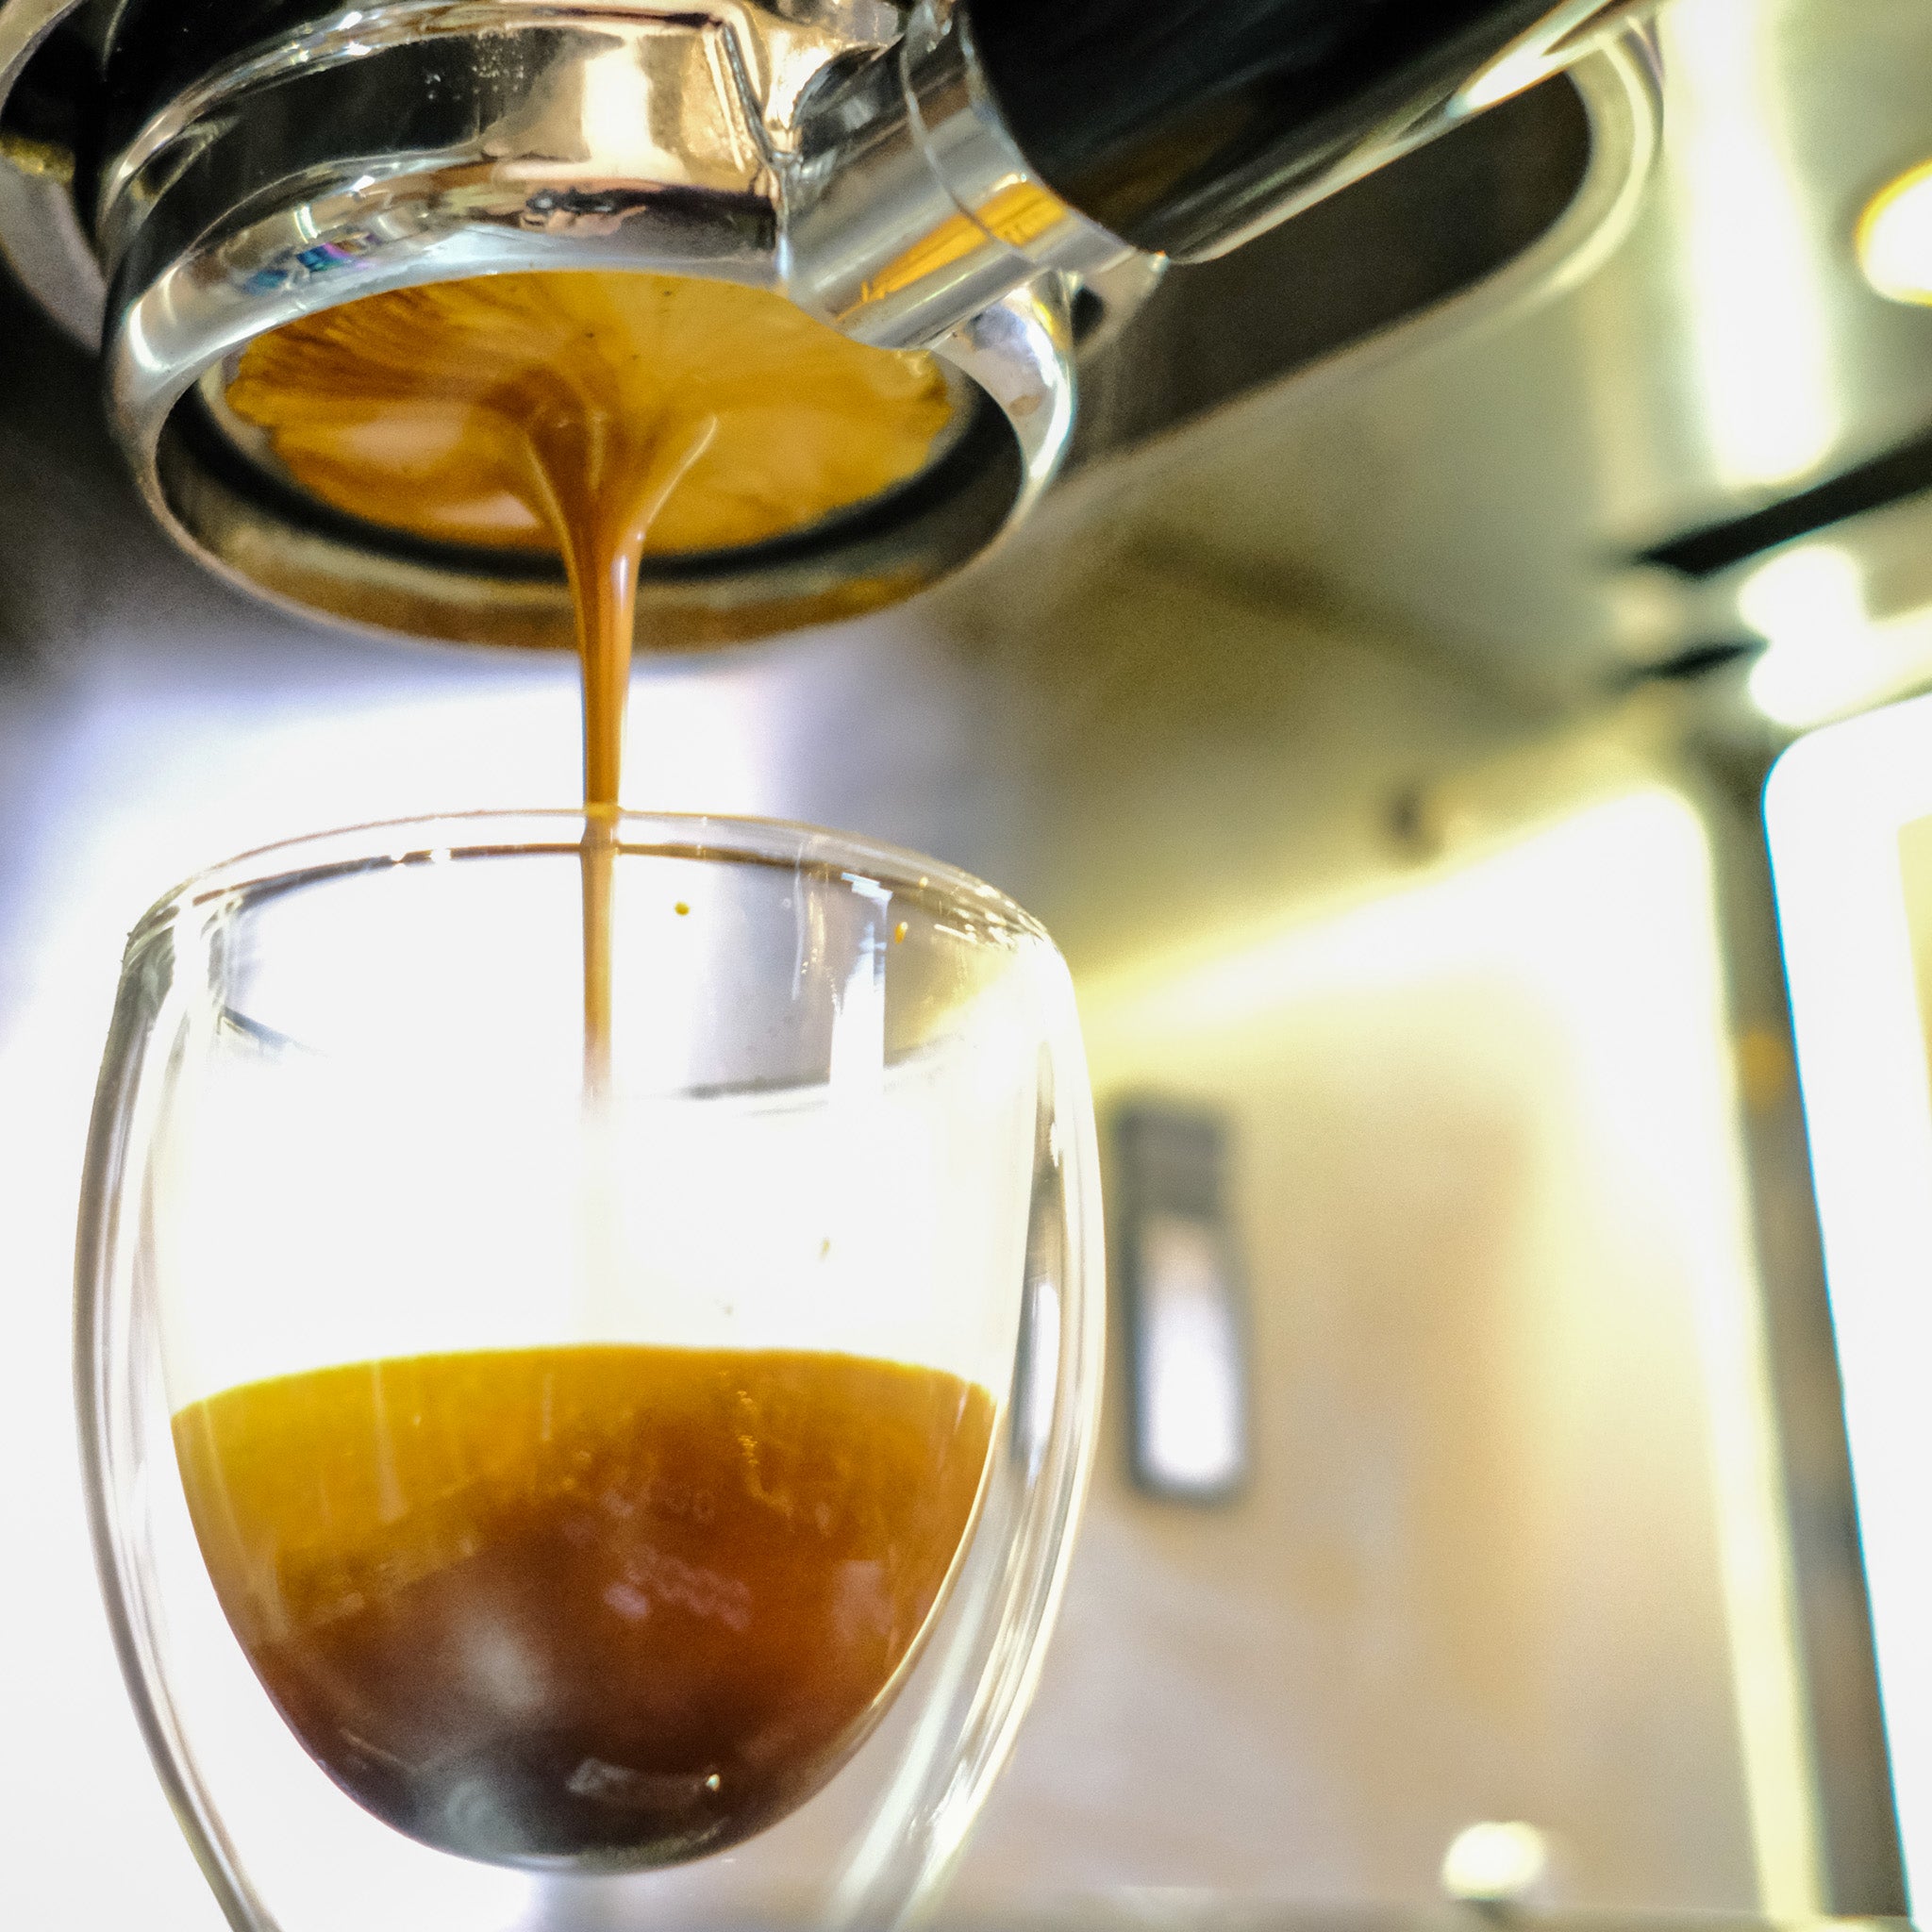 Espresso Blend – The Daily Grind